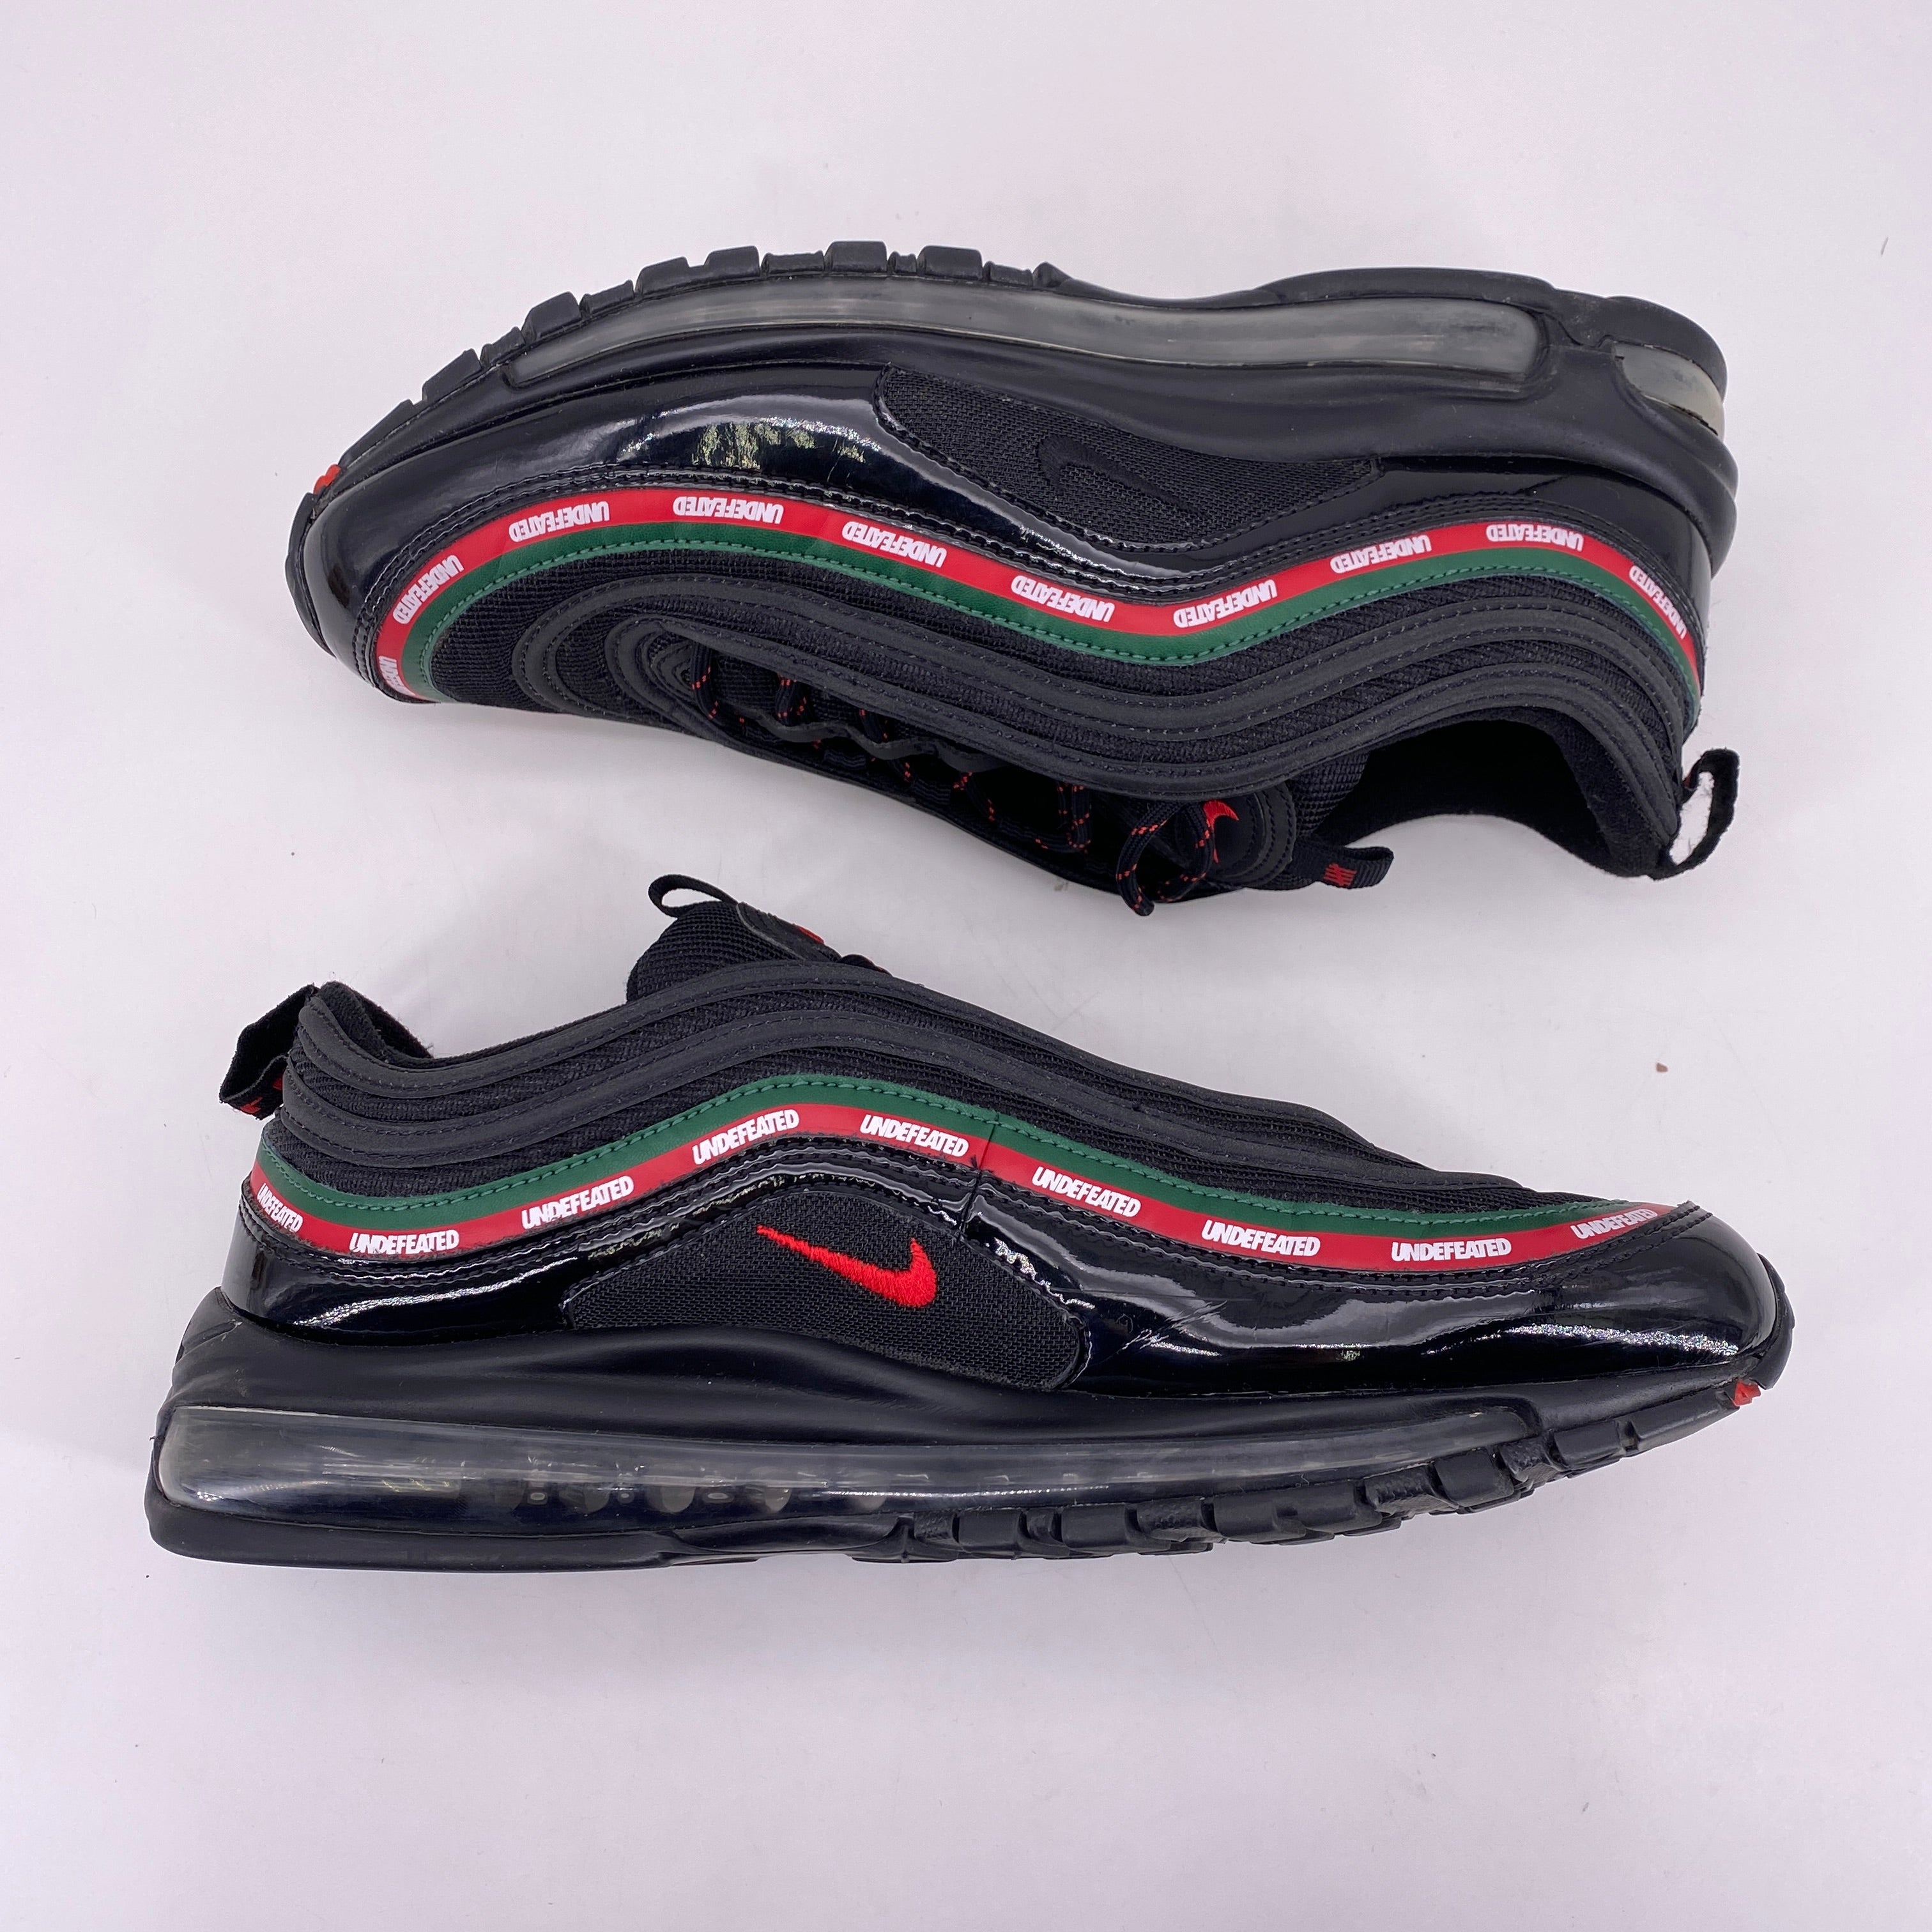 Nike Air Max 97 &quot;UNDFTD BLACK&quot; 2017 Used Size 11.5